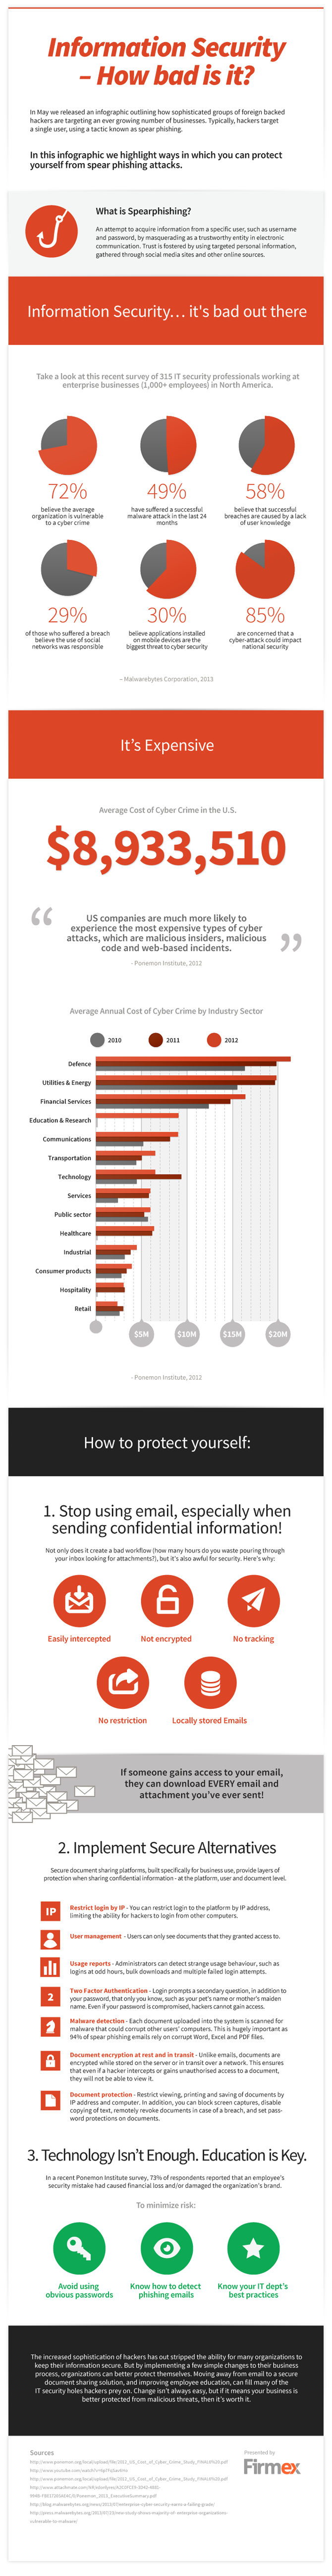 \"InformationSecurity-Infographic-Firmex\"